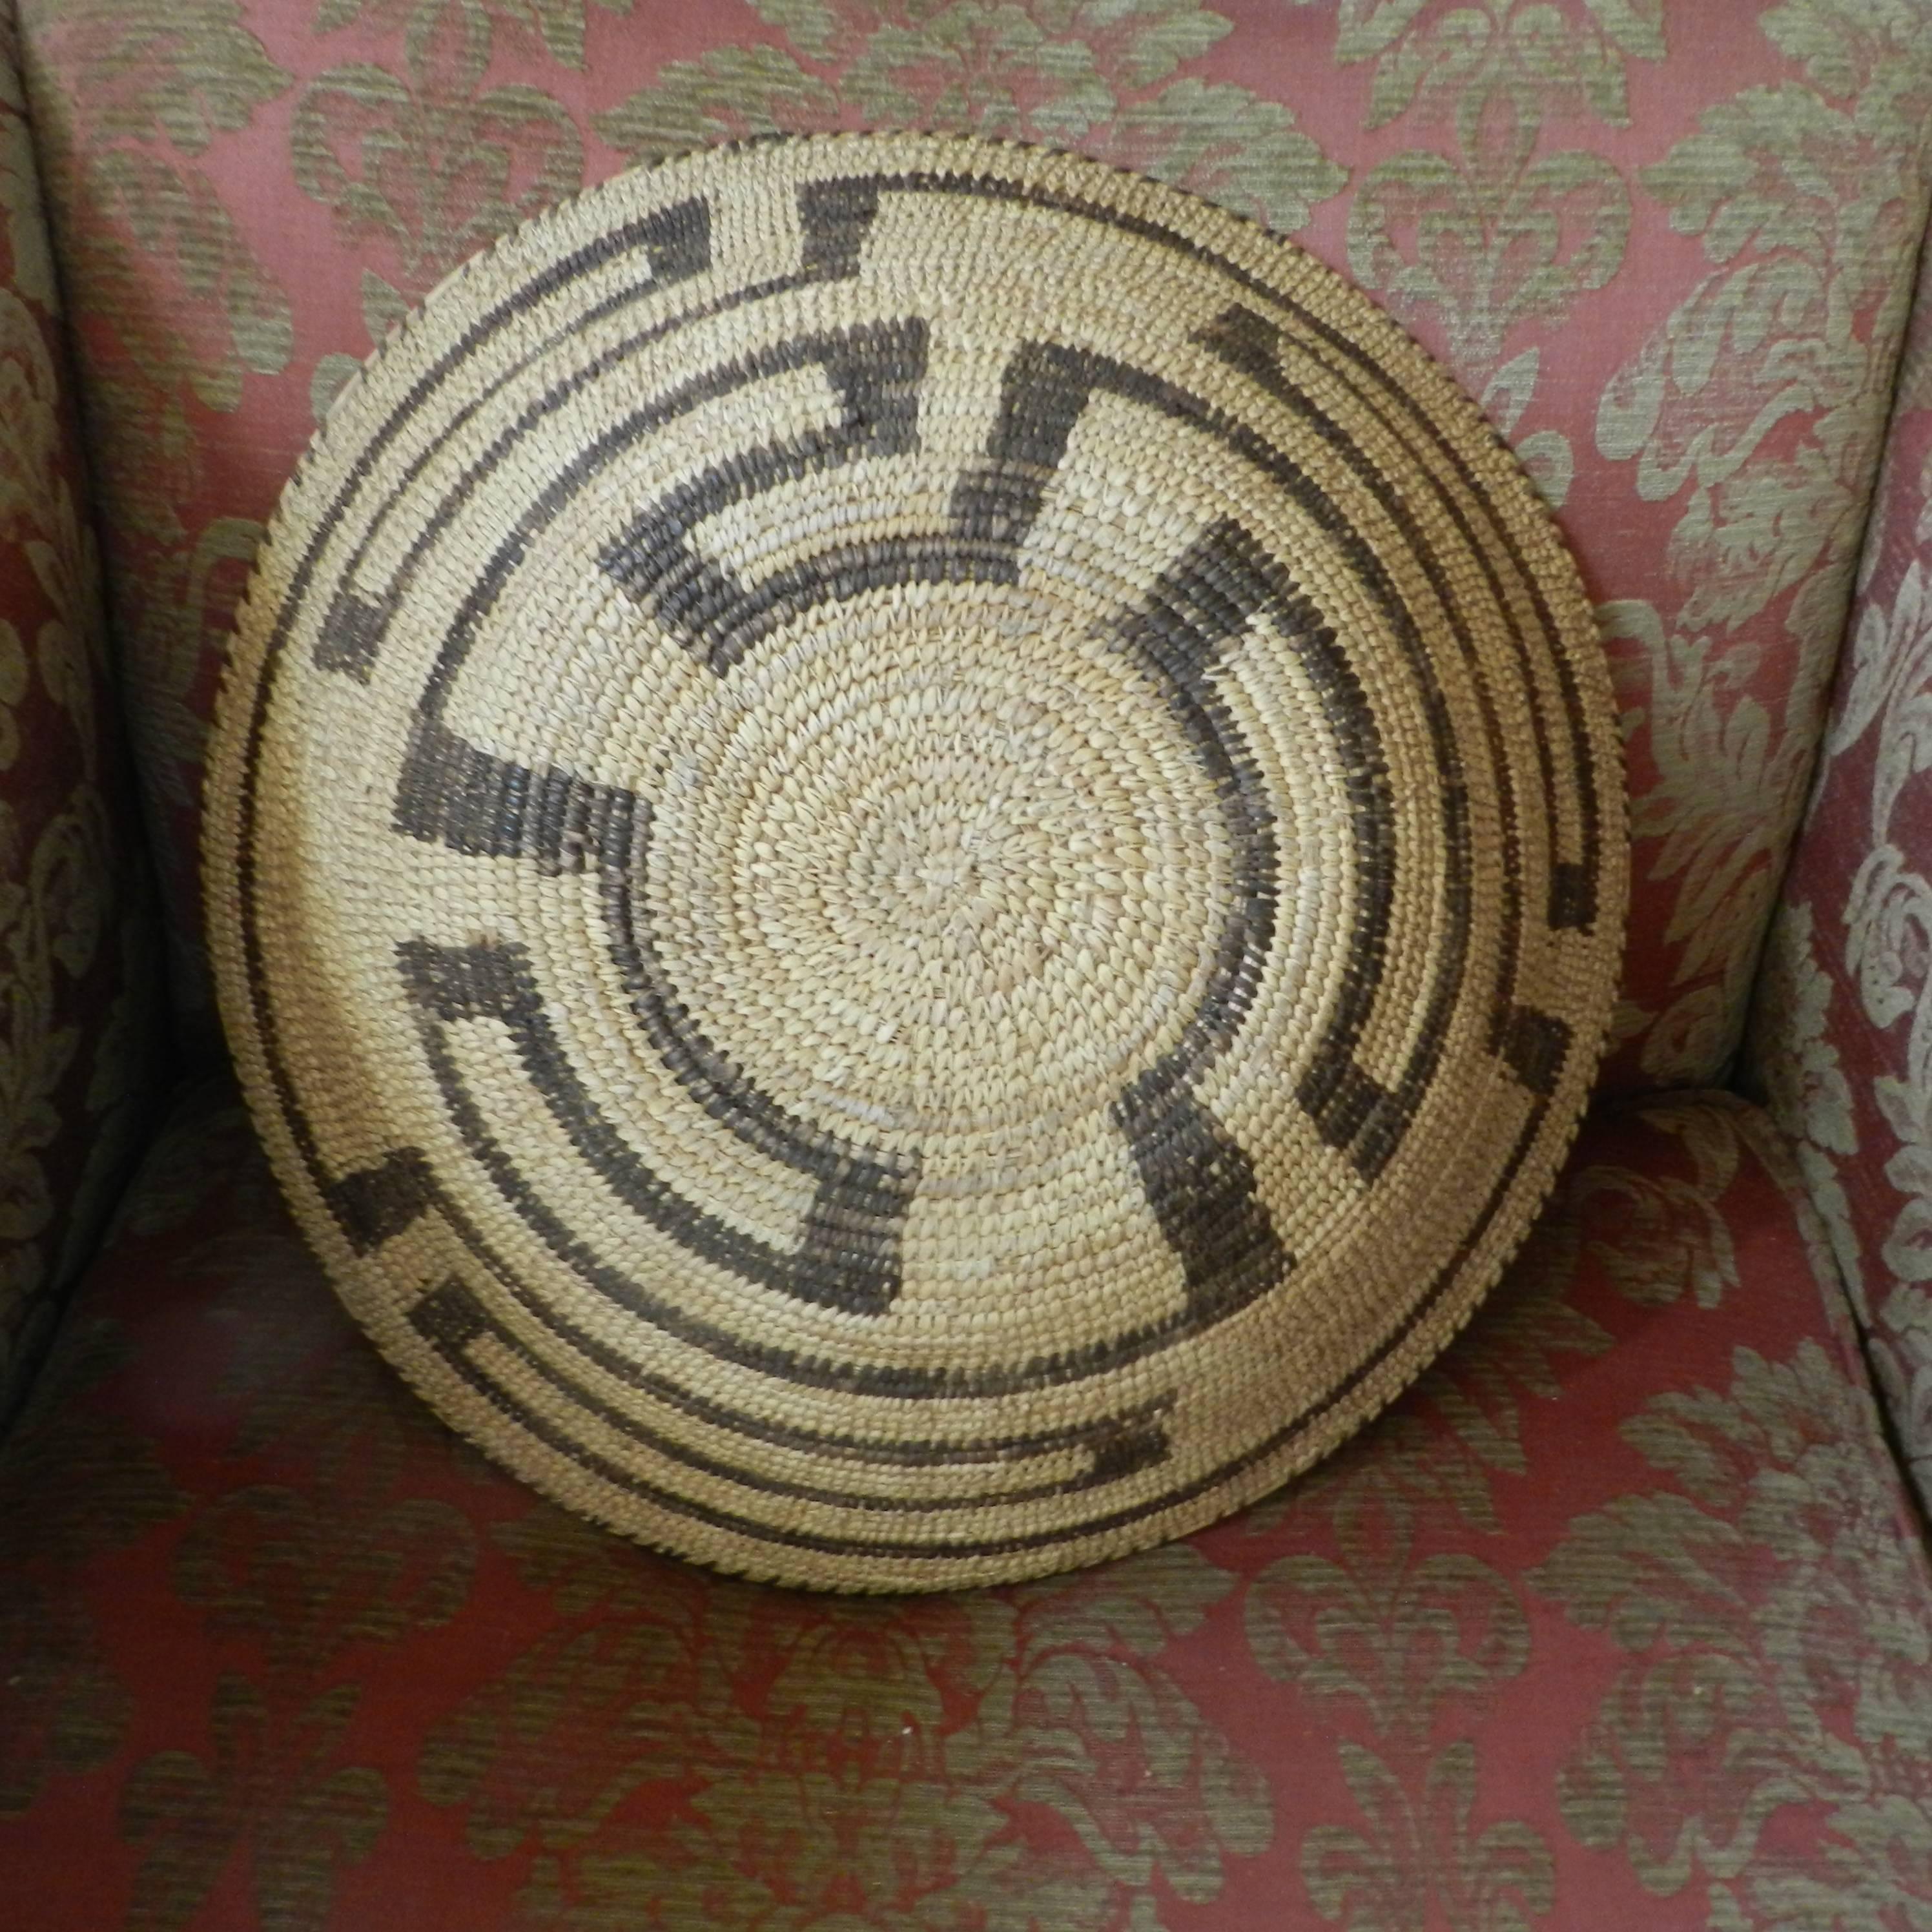 This very large Arizona Papago basket has a nice geometric design, circa 1930s. A few stitches missing on the rim. Measures: 19